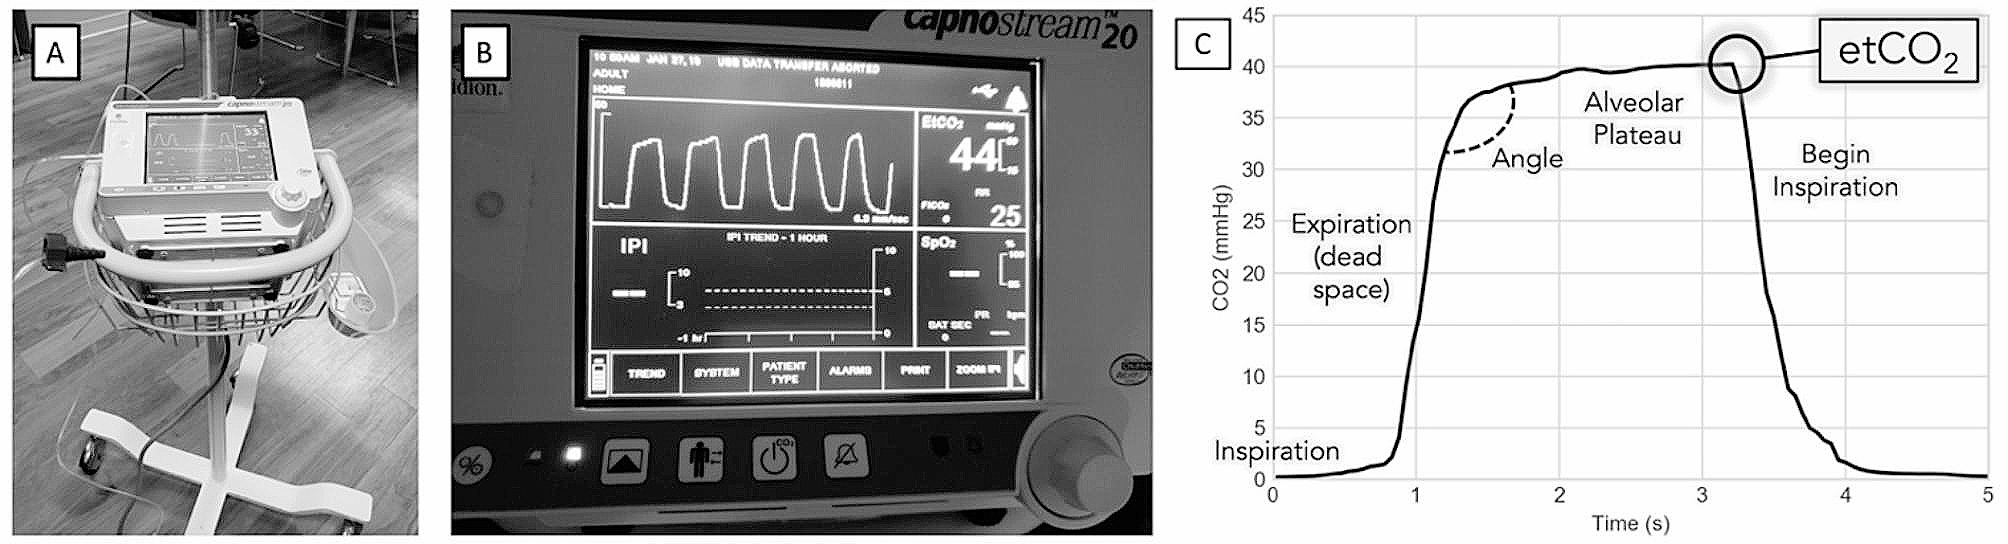 Diagnostic utility of capnography in emergency department triage for screening acidemia: a pilot study